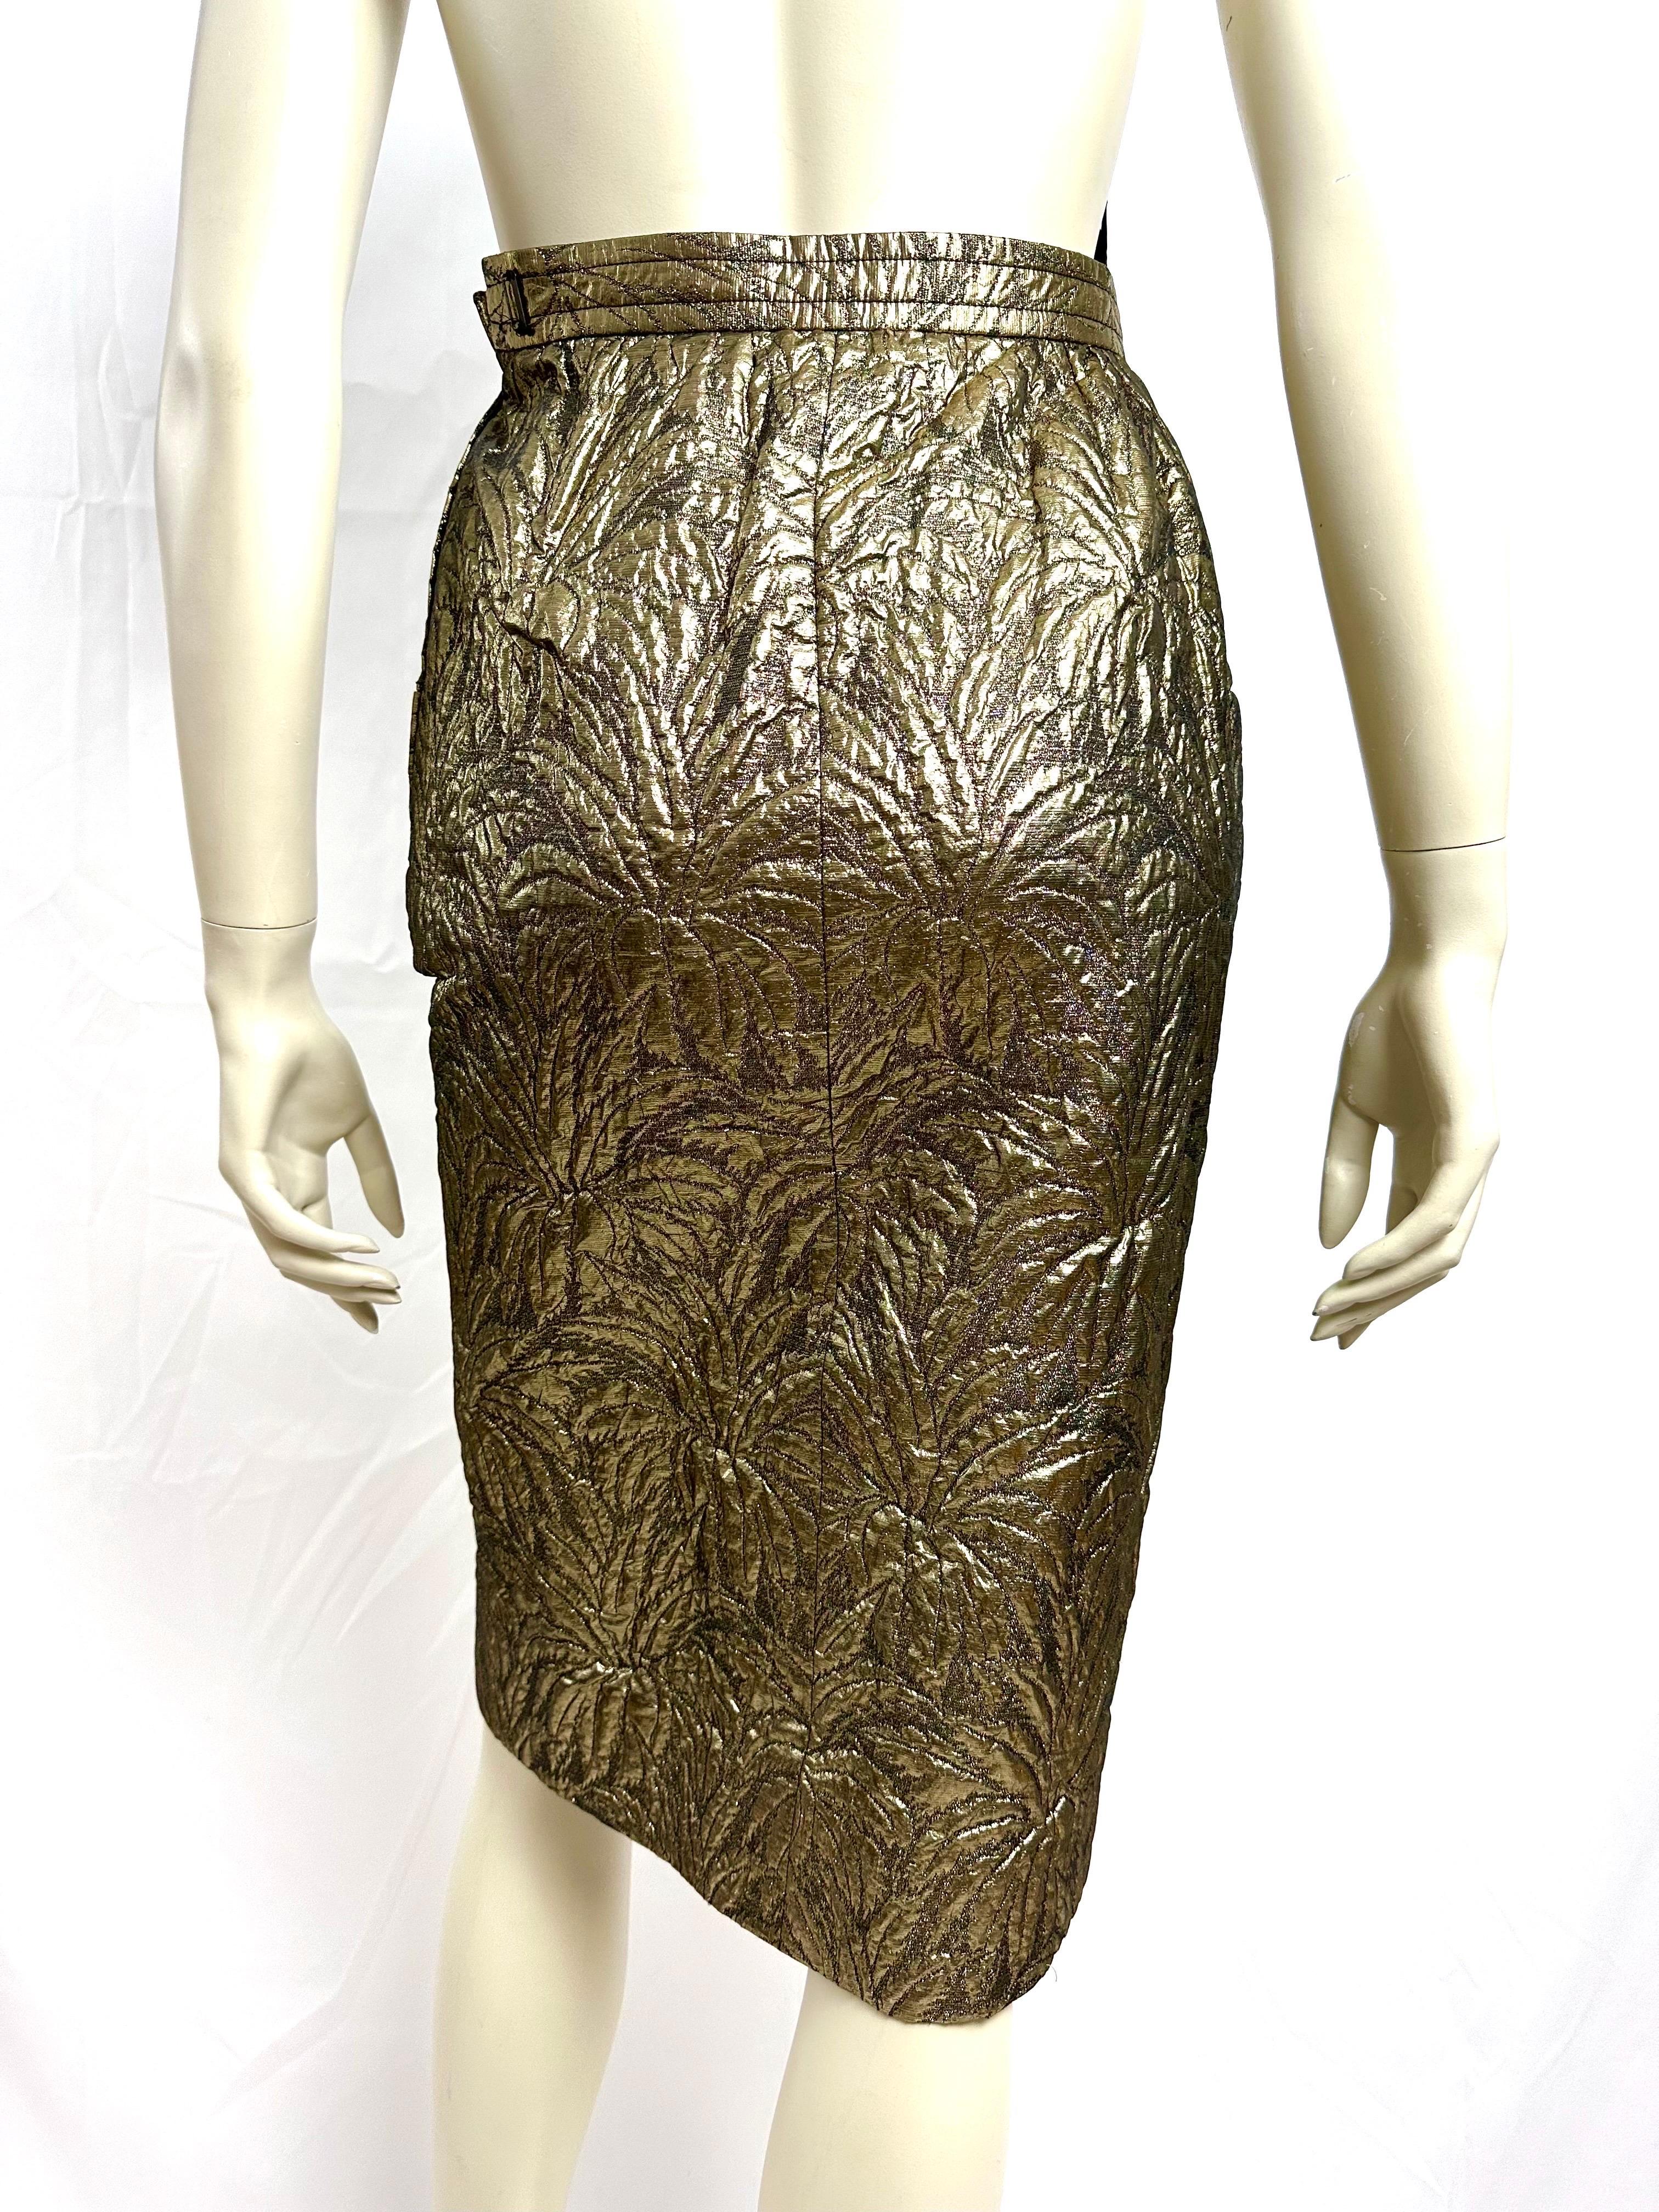 YSL Yves saint Laurent gold brocade skirt suit F/W 86 For Sale 9